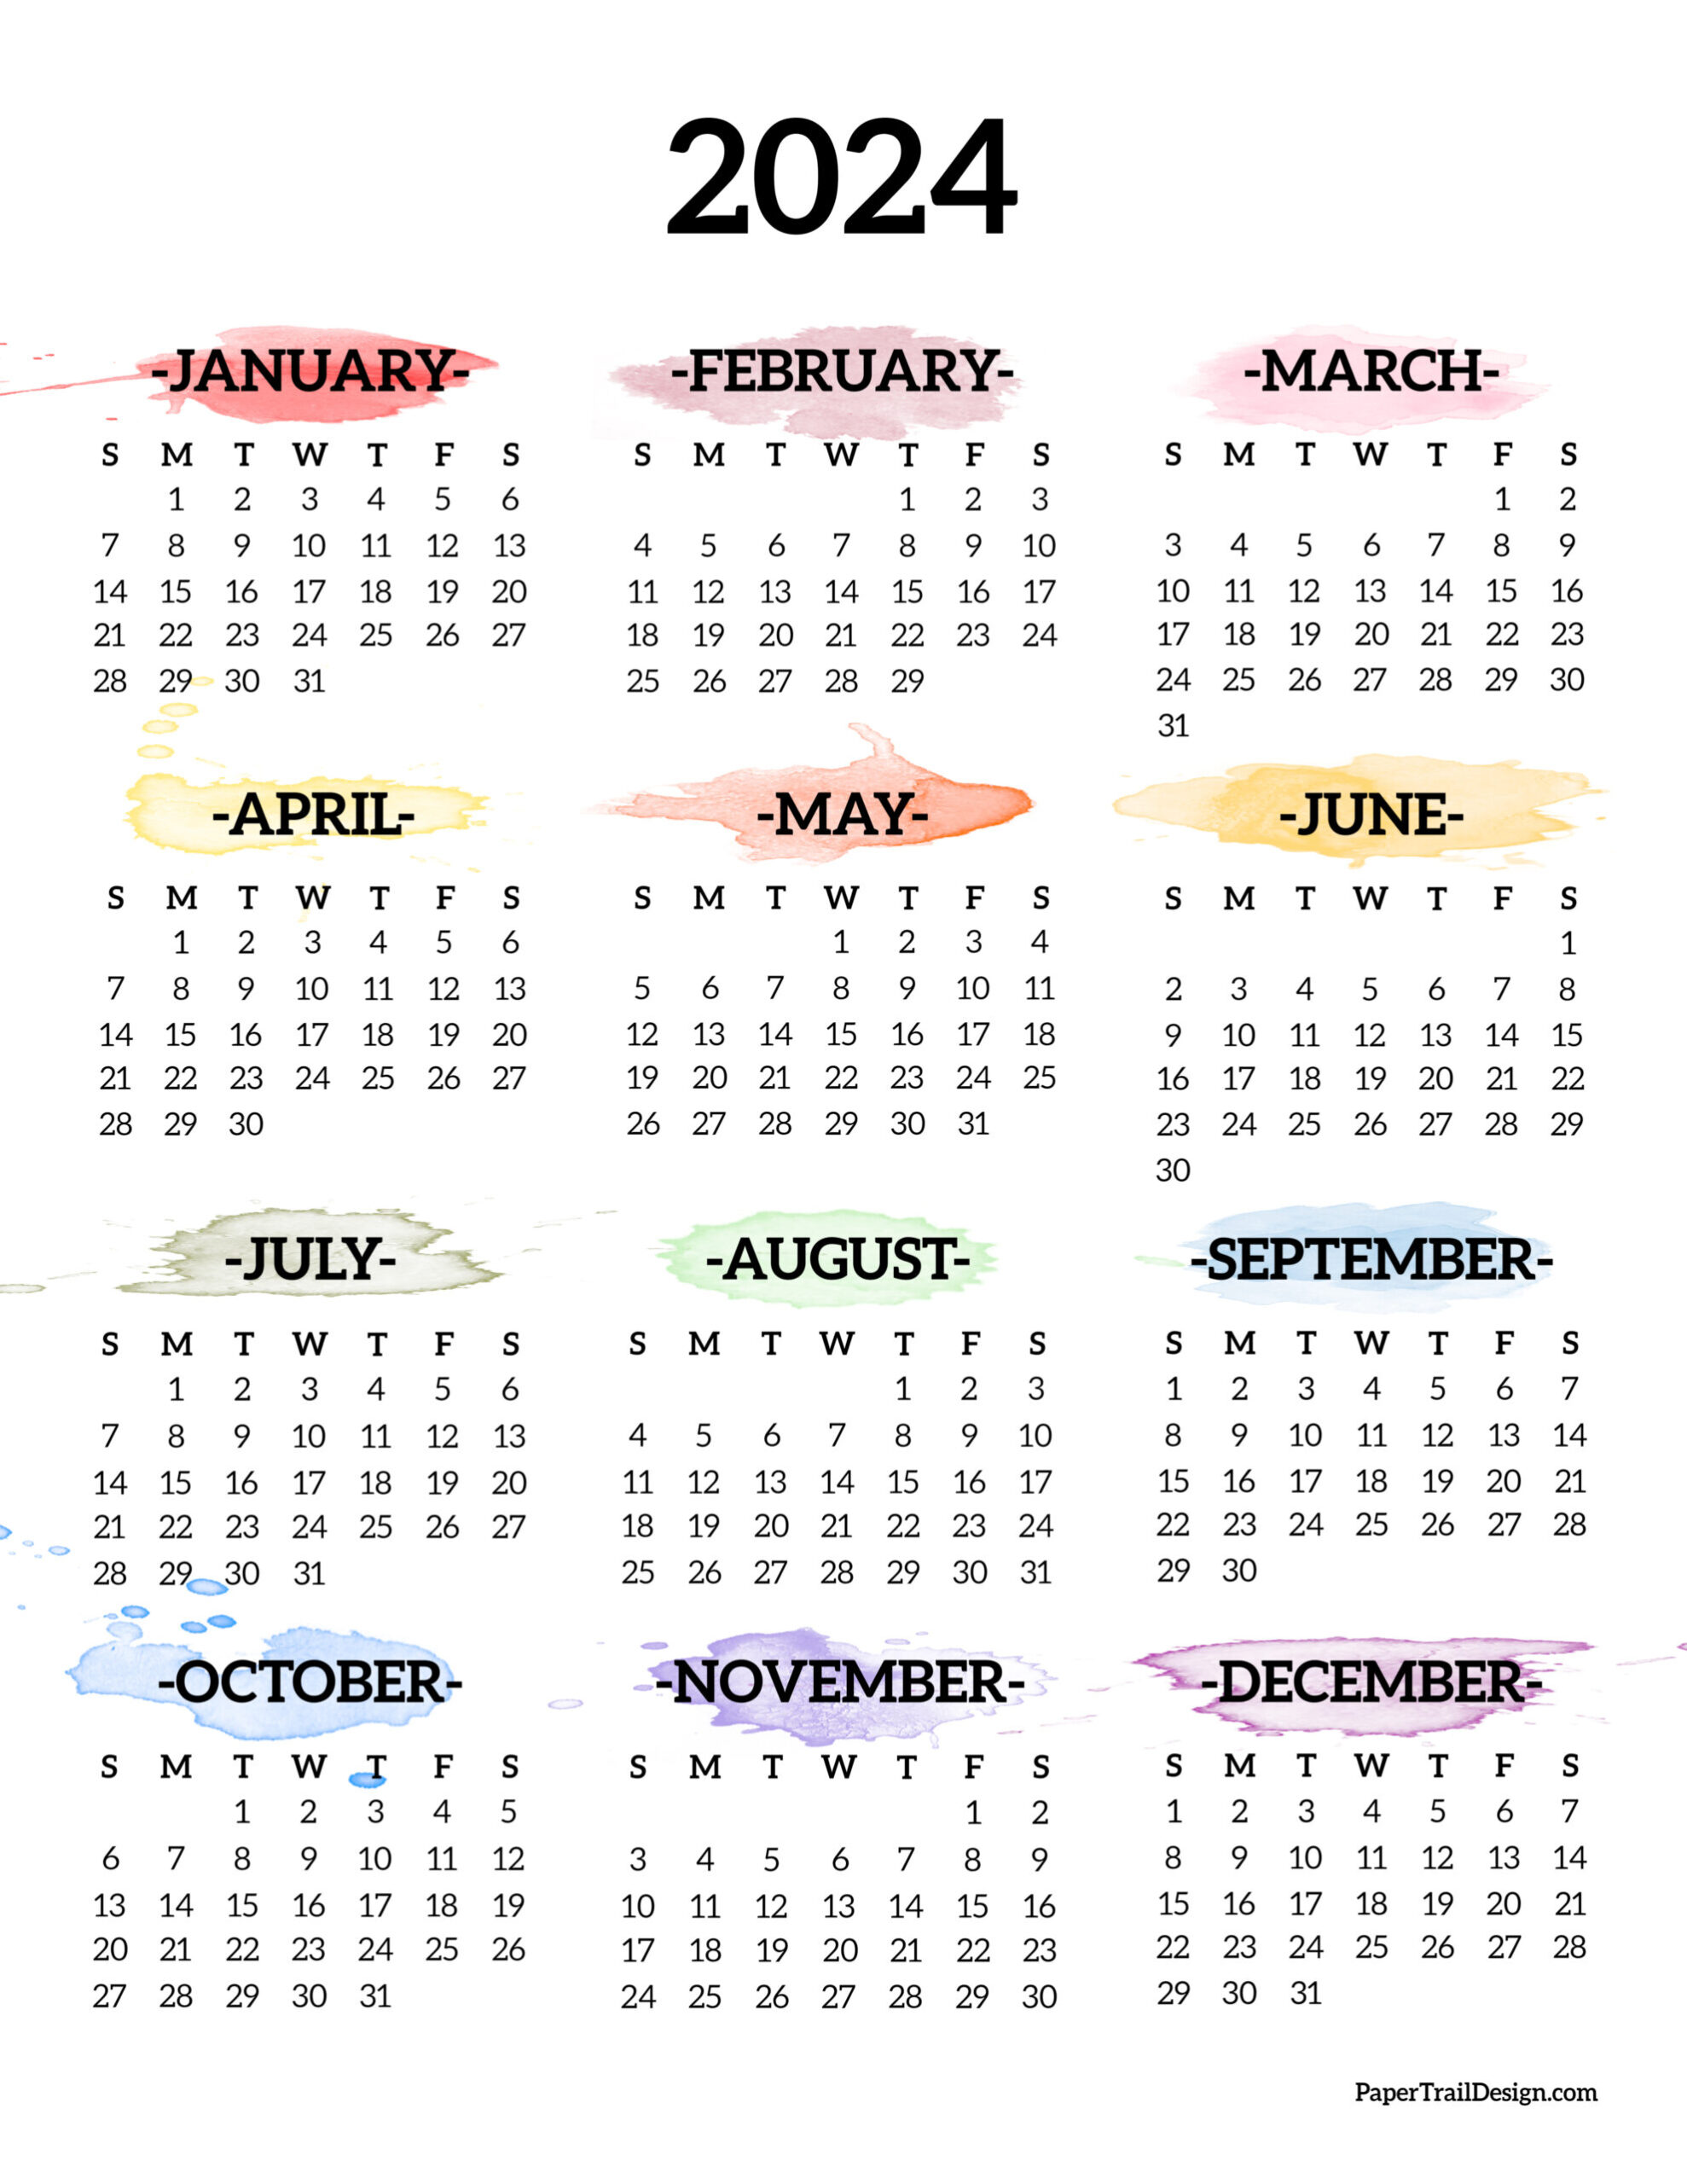 Calendar 2024 Printable One Page - Paper Trail Design for Free Printable 2024 Calendar On One Page